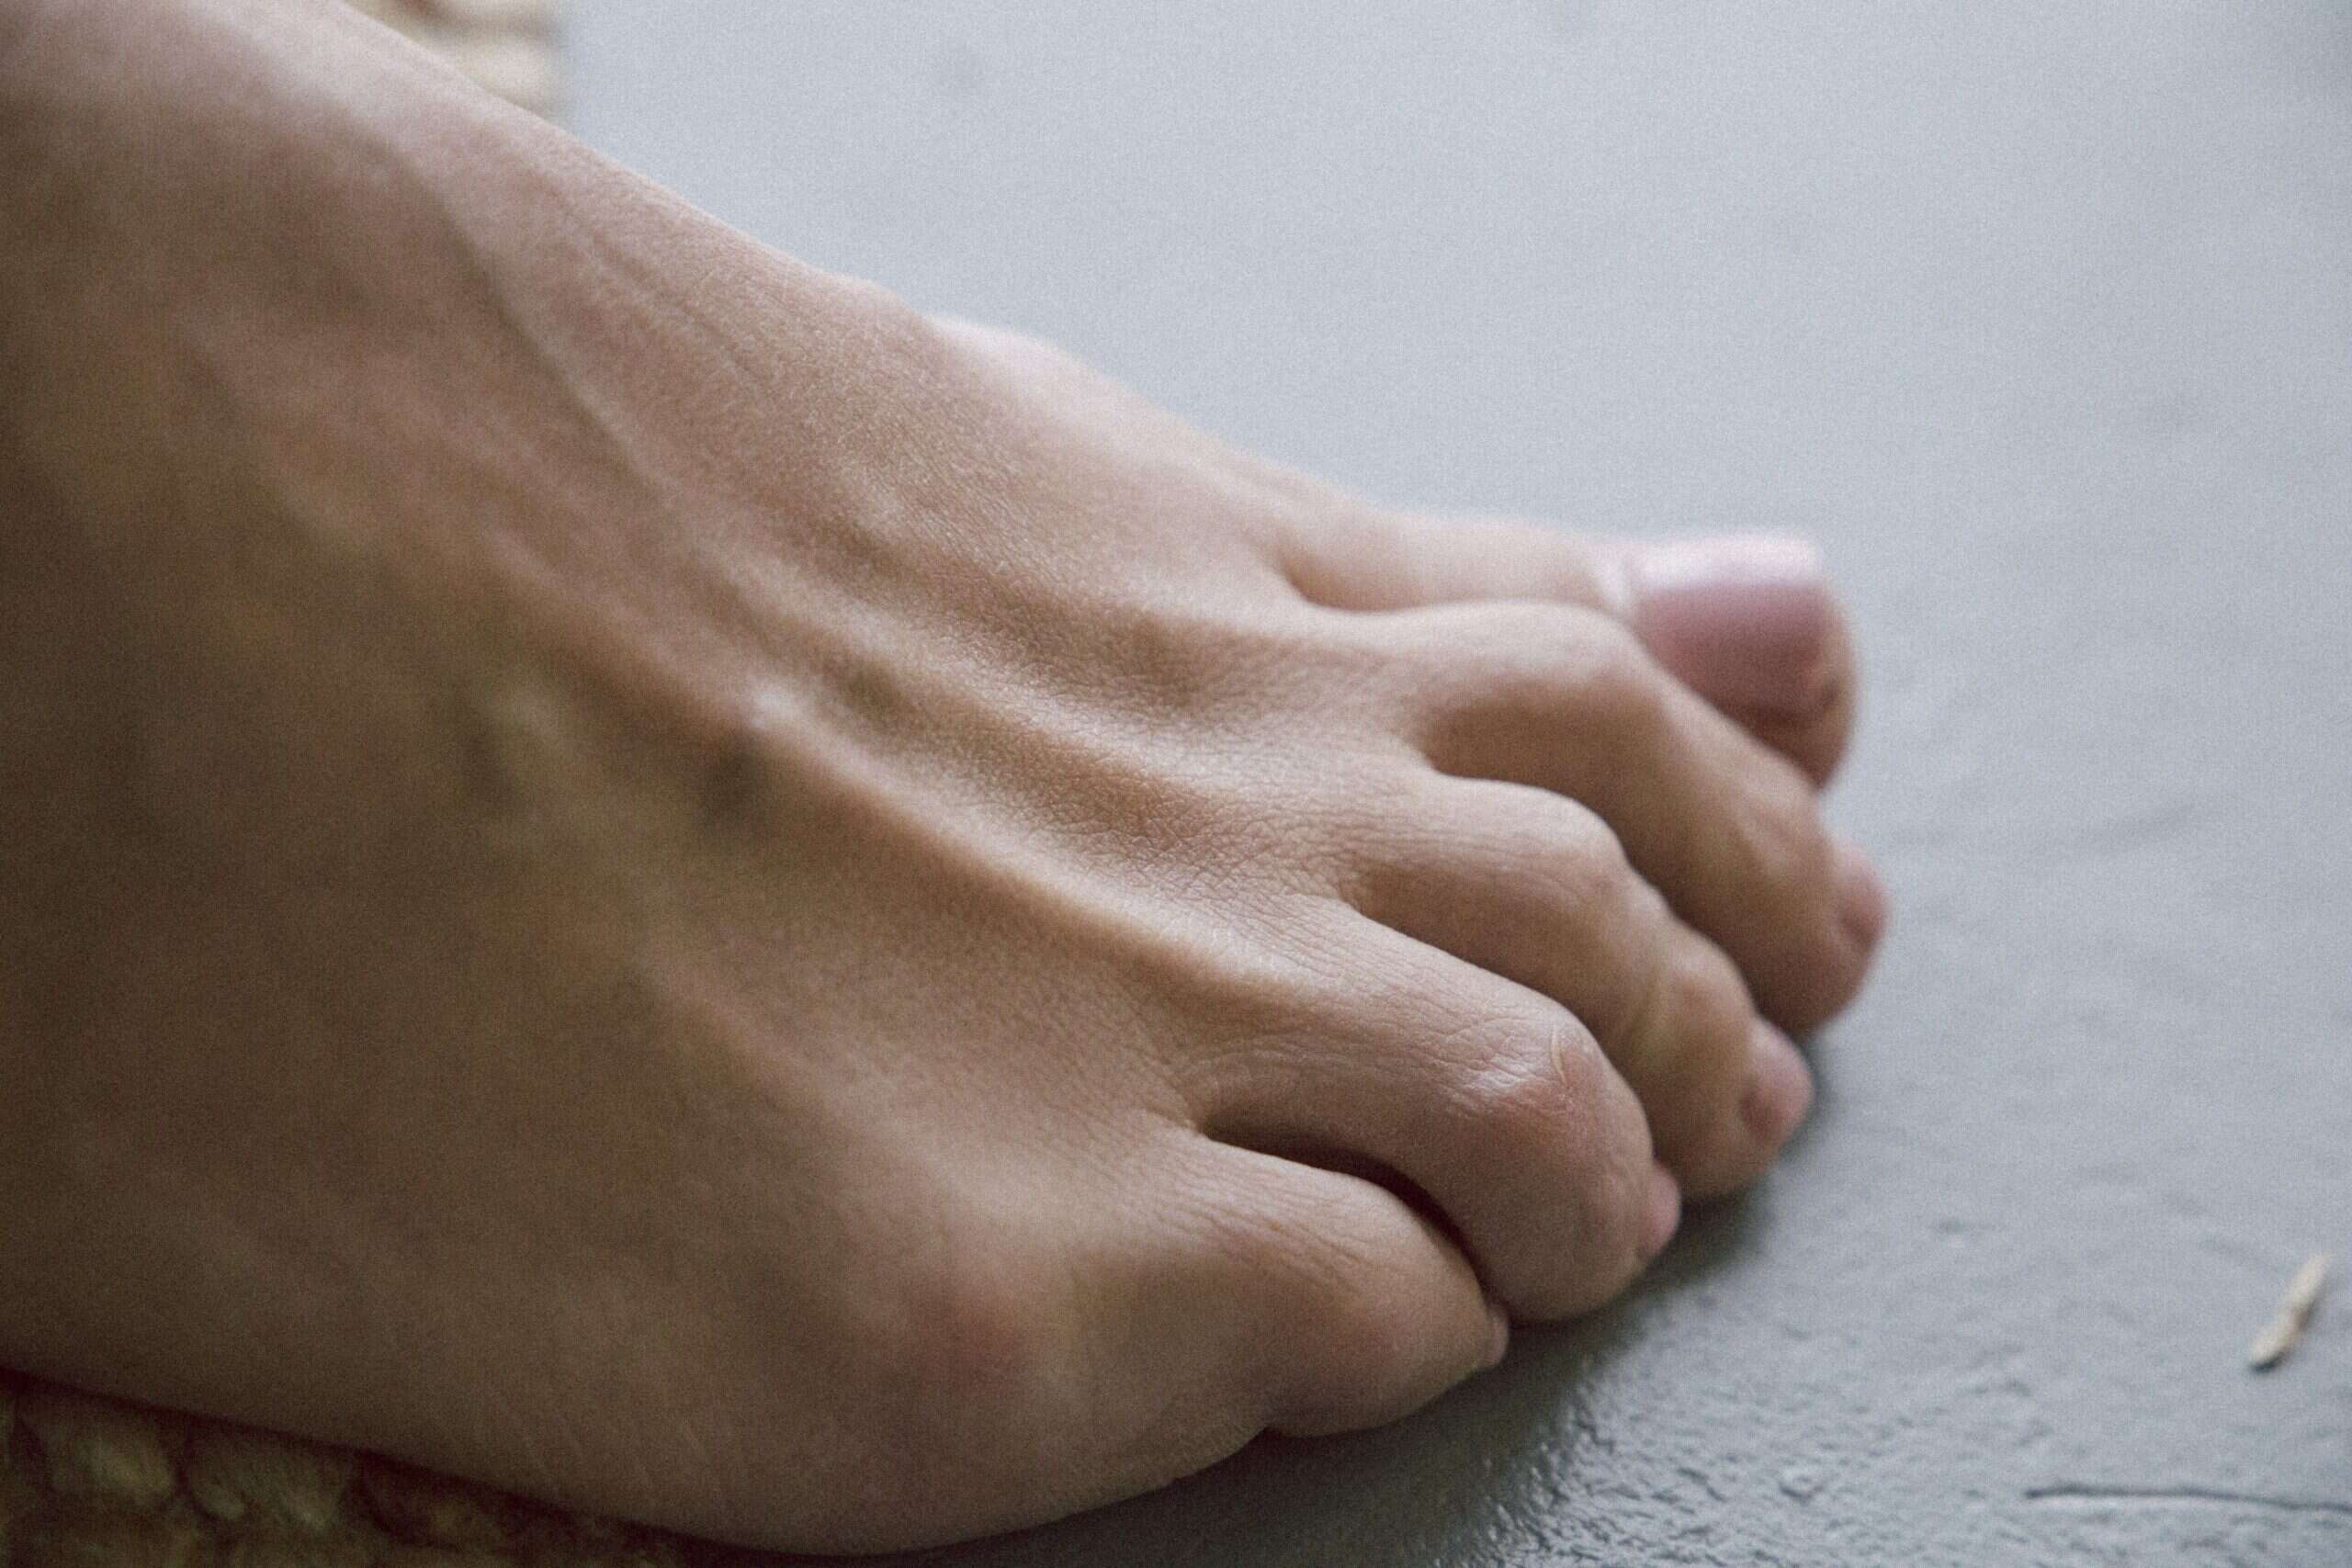 Why is foot care important in diabetes?